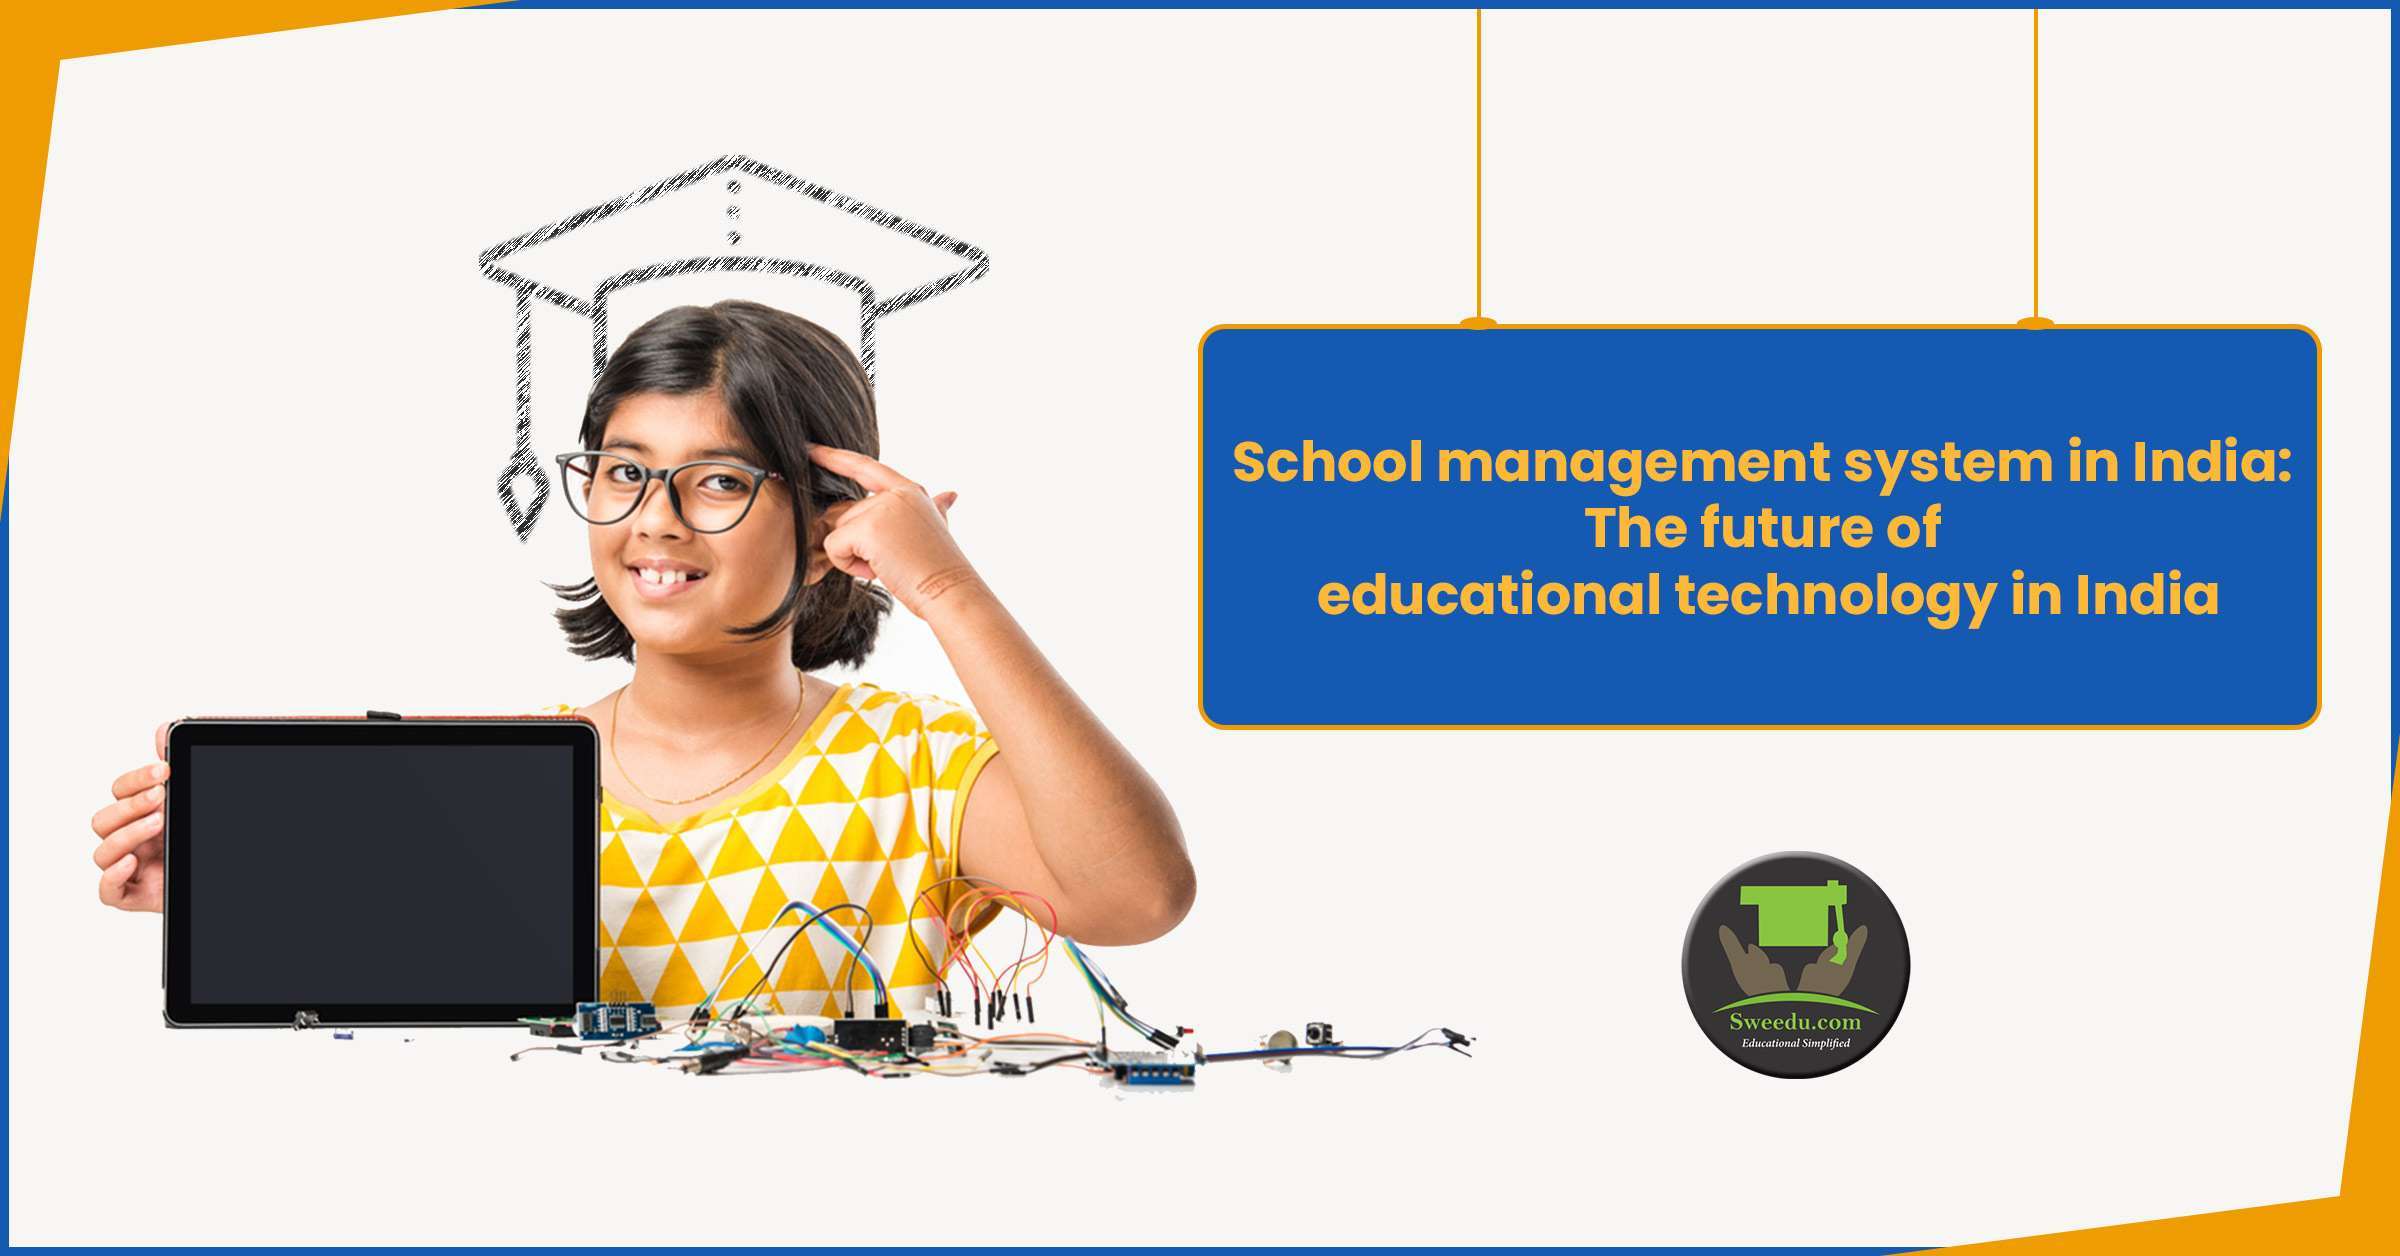 School management system in India: The future of educational technology in India